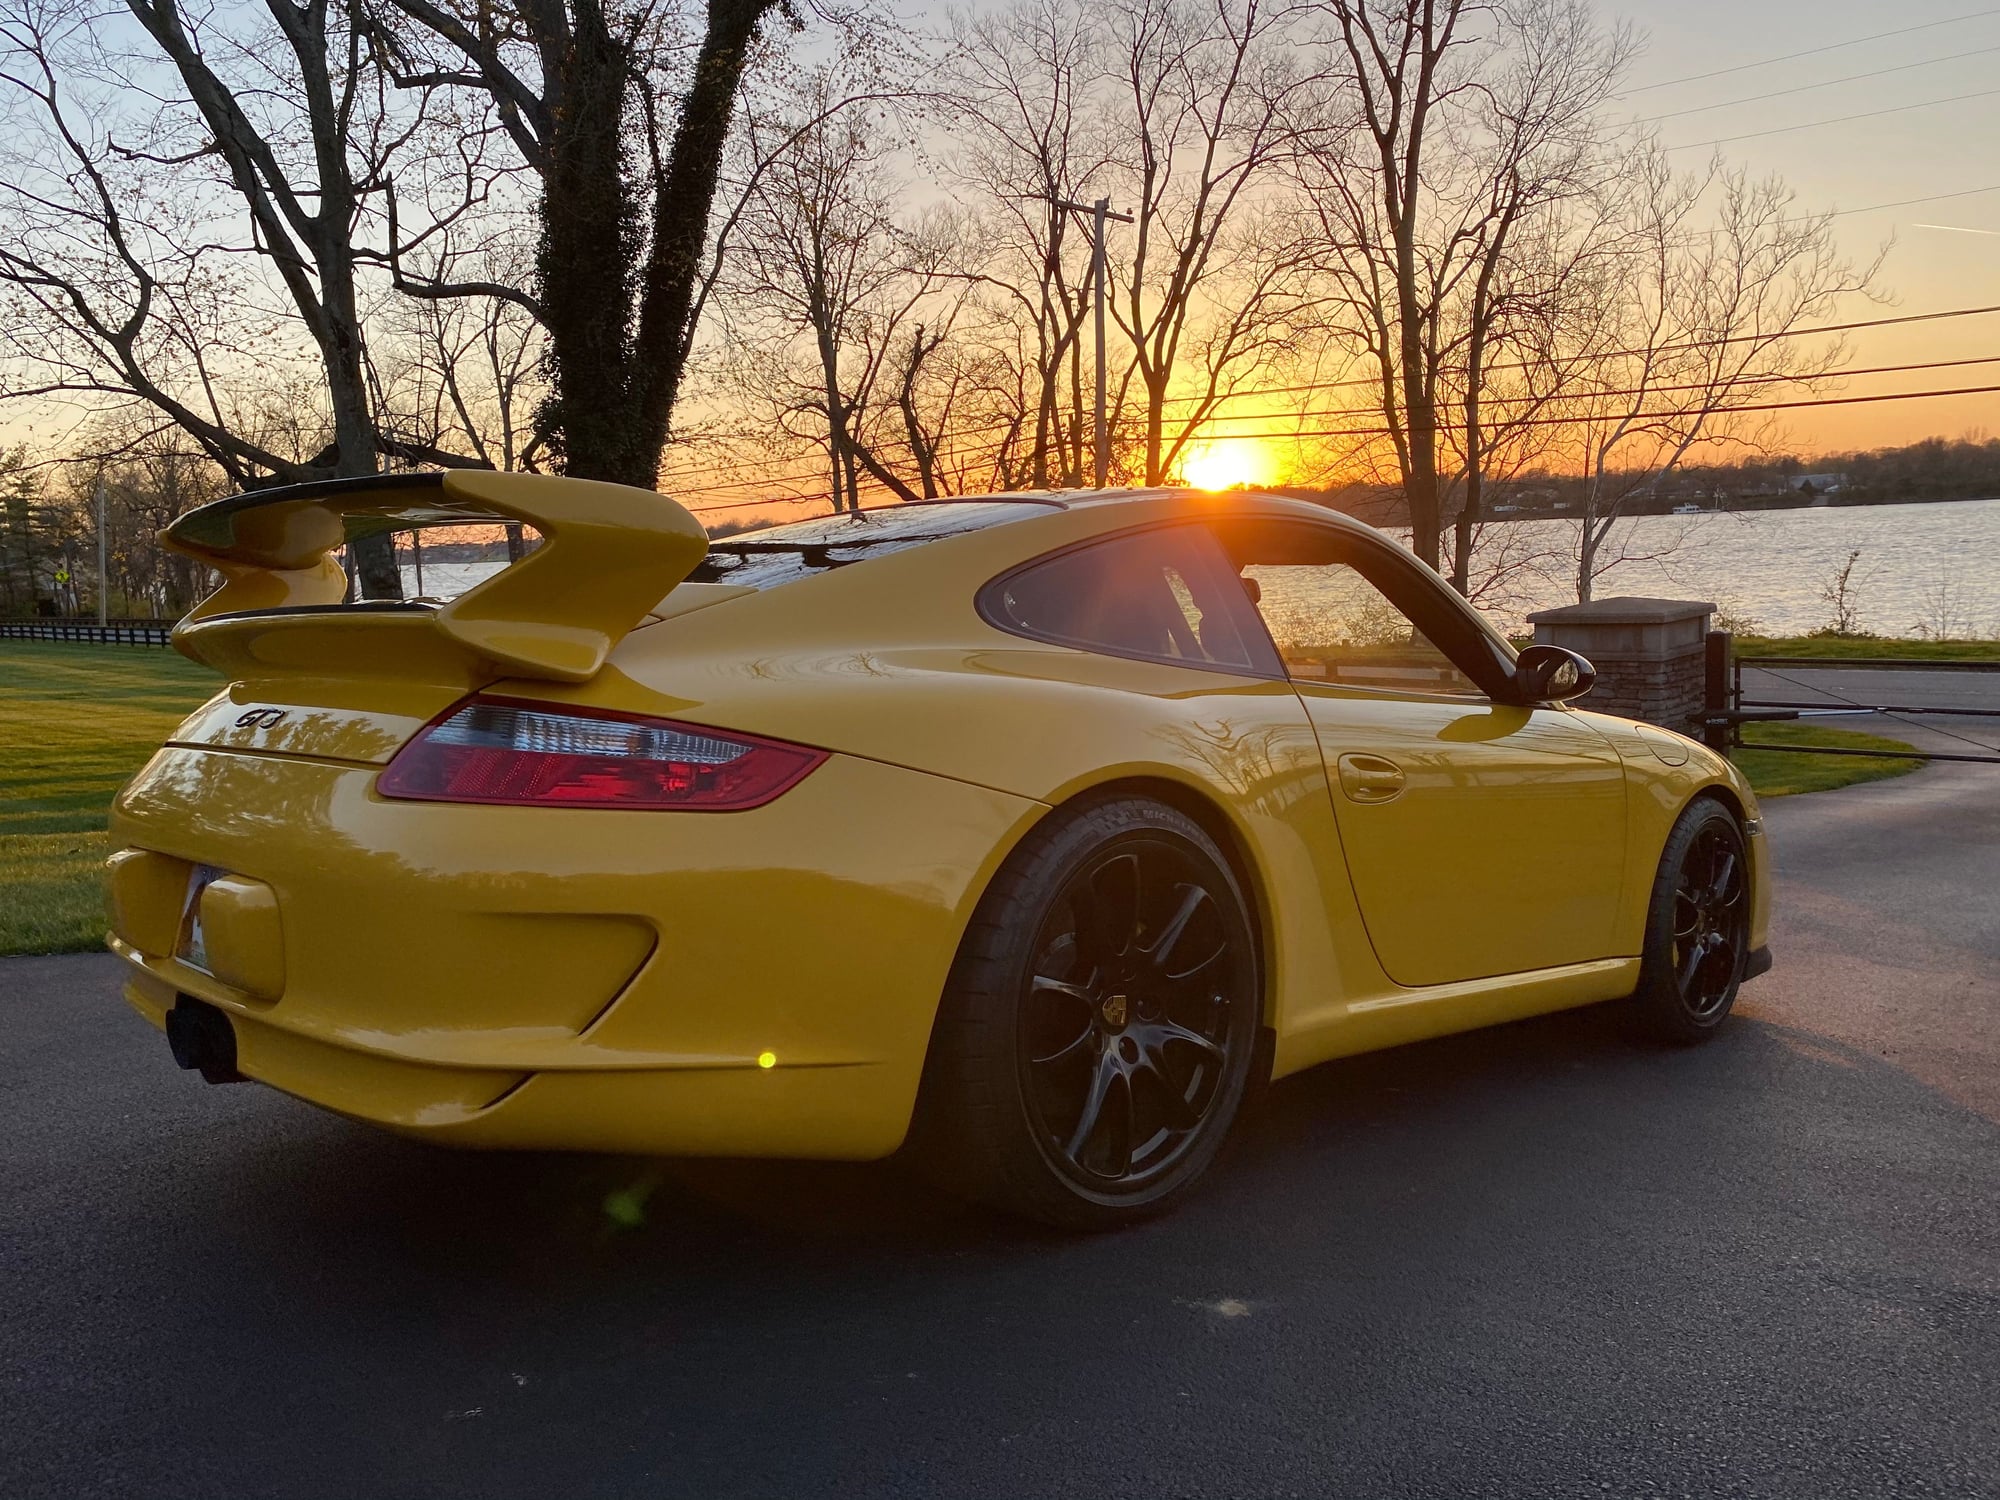 2007 Porsche 911 - Speed yellow 997.1 GT3 - Used - VIN WP0AC29967S793098 - 22,000 Miles - 6 cyl - 4WD - Manual - Coupe - Yellow - Louisville, KY 40299, United States